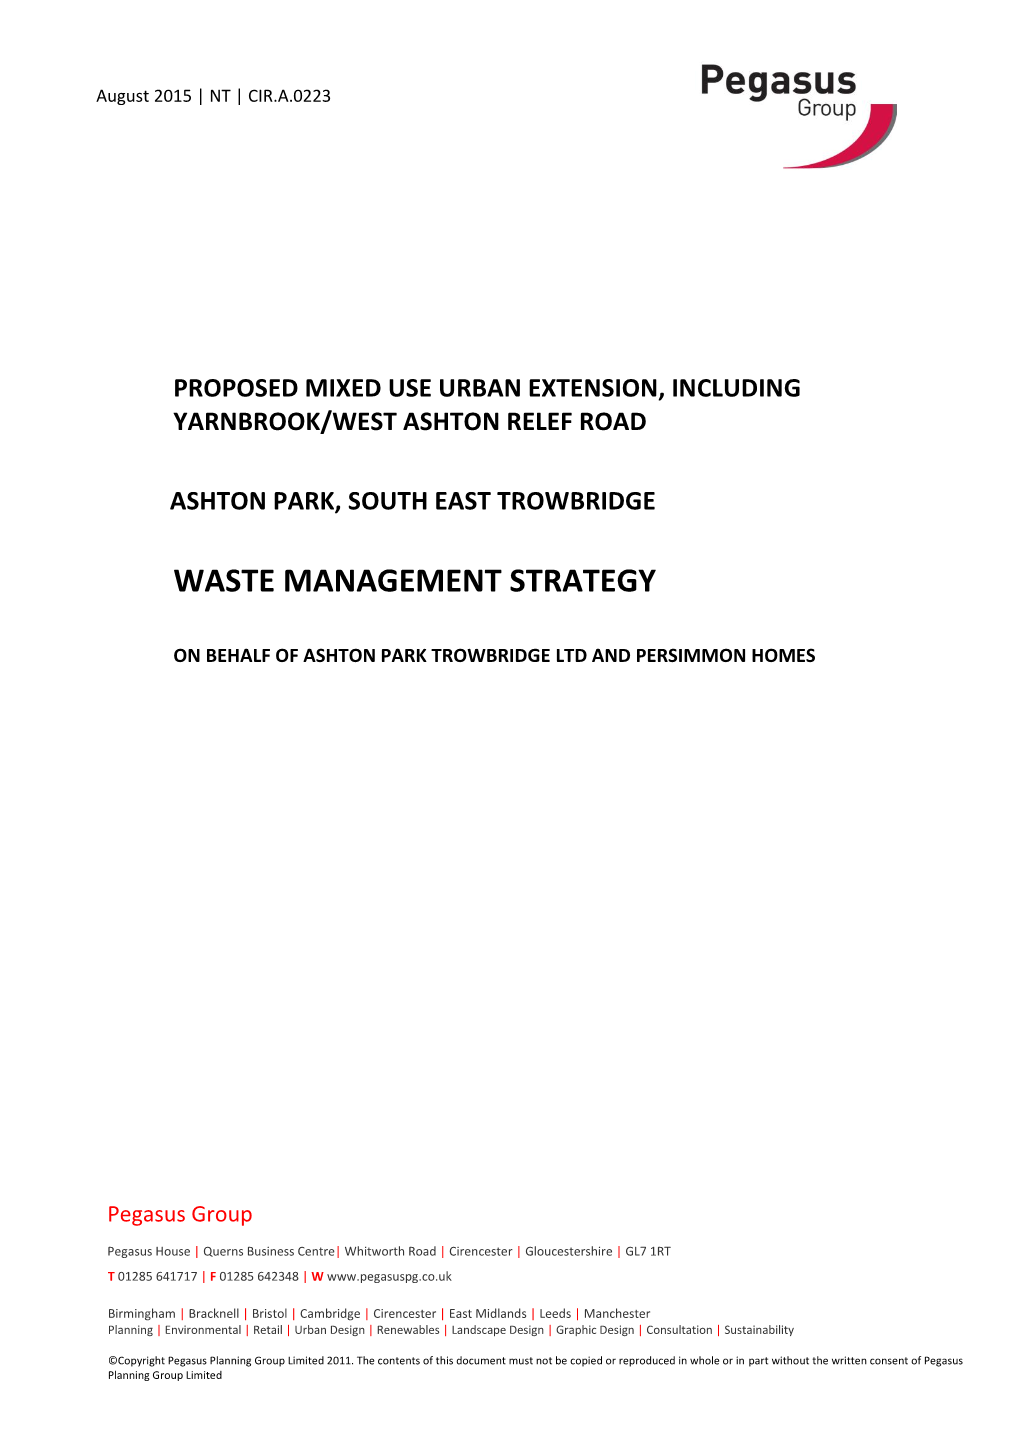 Waste Management Strategy